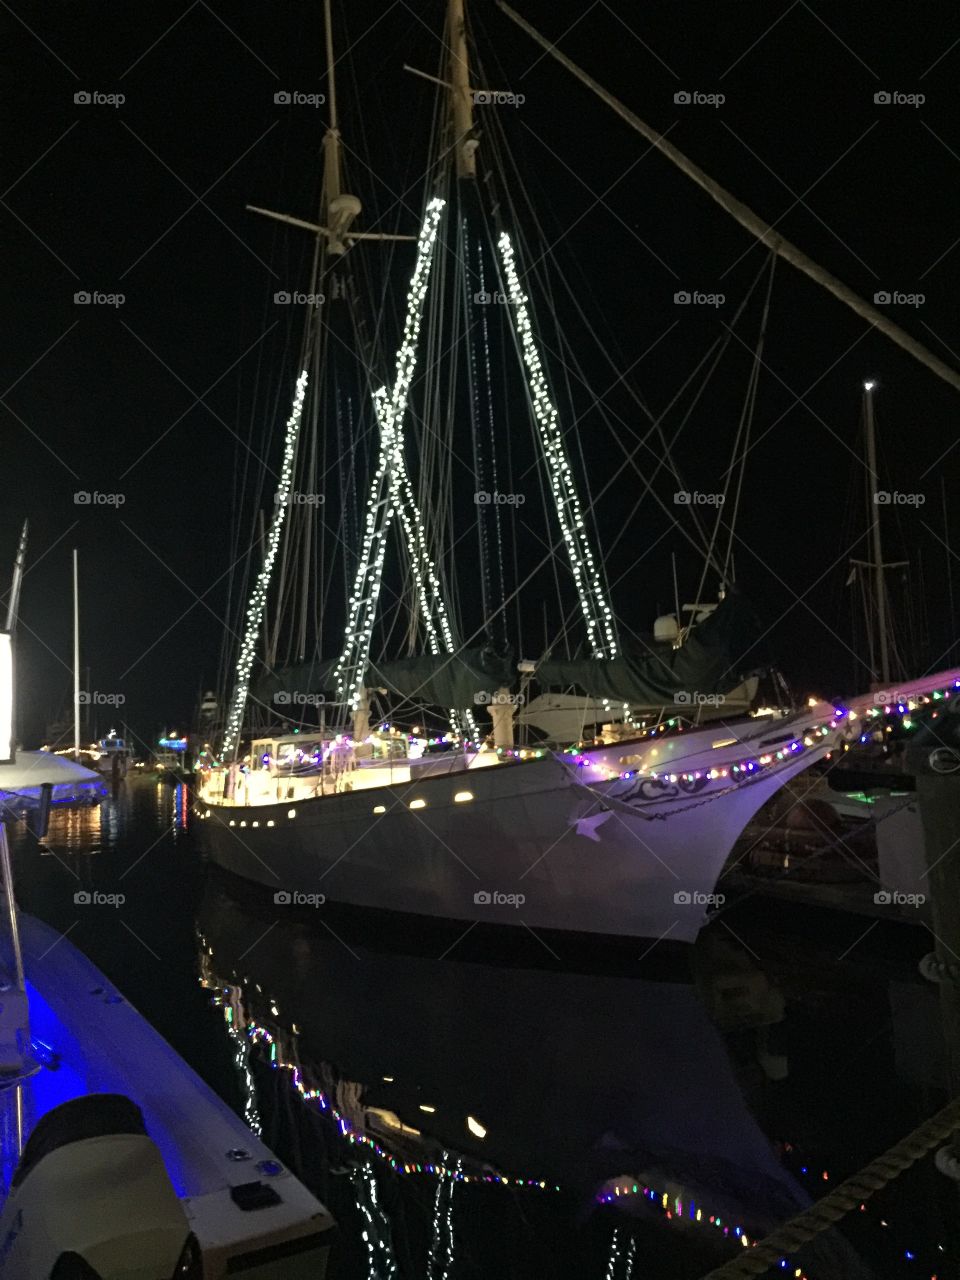 Harbored ship in Key West at Christmas 